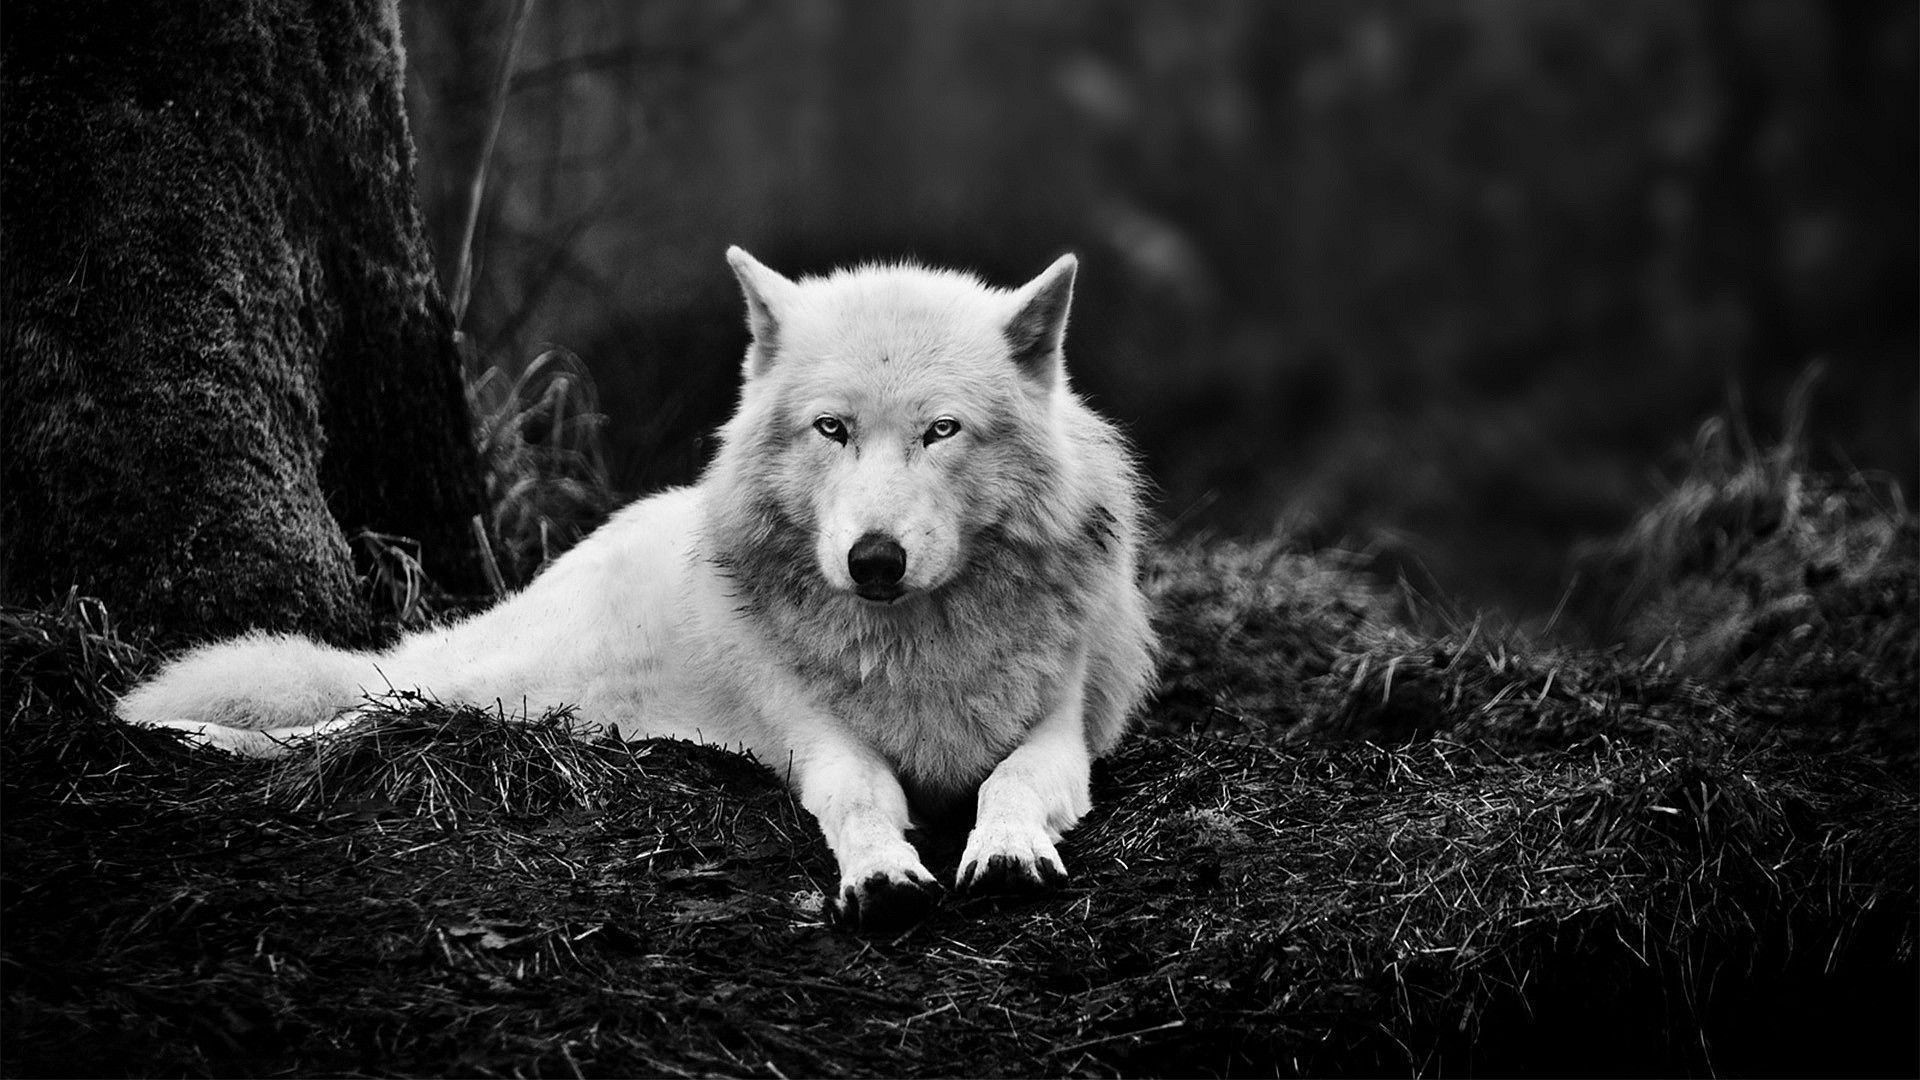 1920x1080 Extraordinary wolf wallpaper free download beautiful animal pak quotes  wallpaper images of extraordinary wolf wallpaper jpg